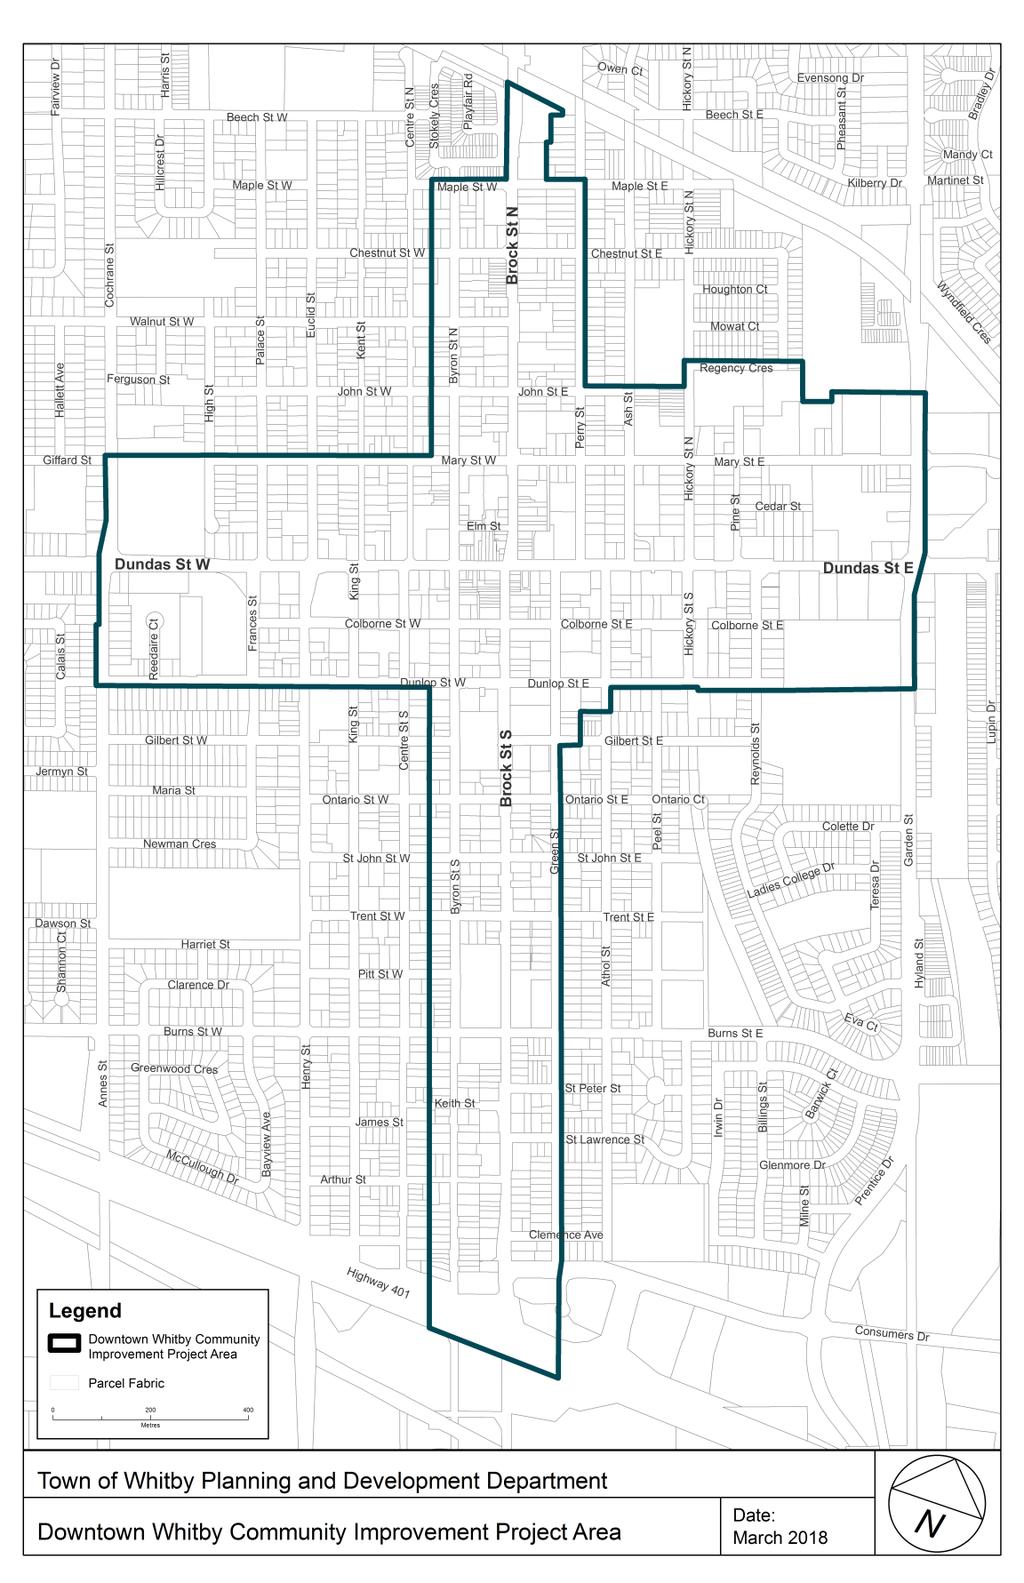 Appendix A: Map of Downtown Whitby